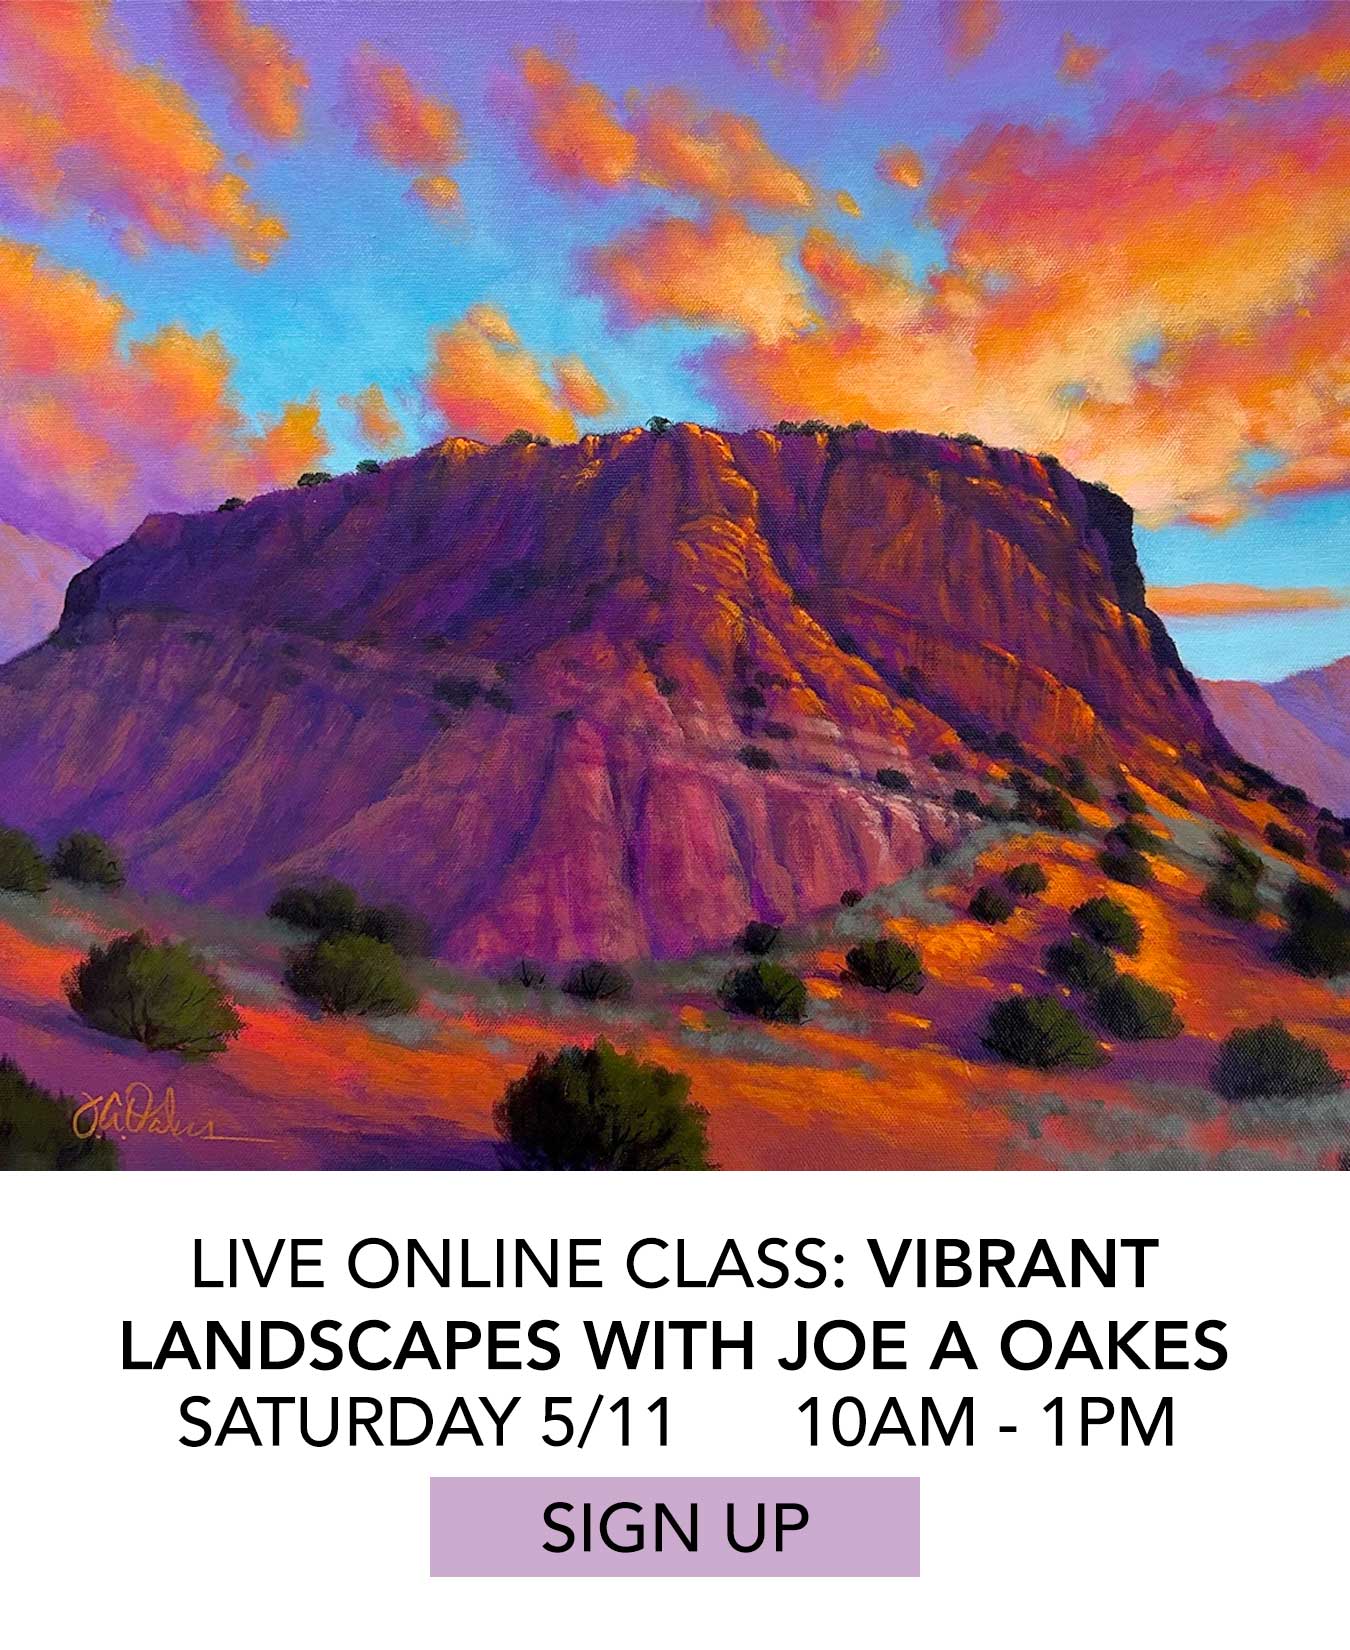 Live Online Class: Vibrant Landscapes with Joe A Oakes. Saturday 5/11 from 10:00am to 1:00pm. Click to Sign Up.